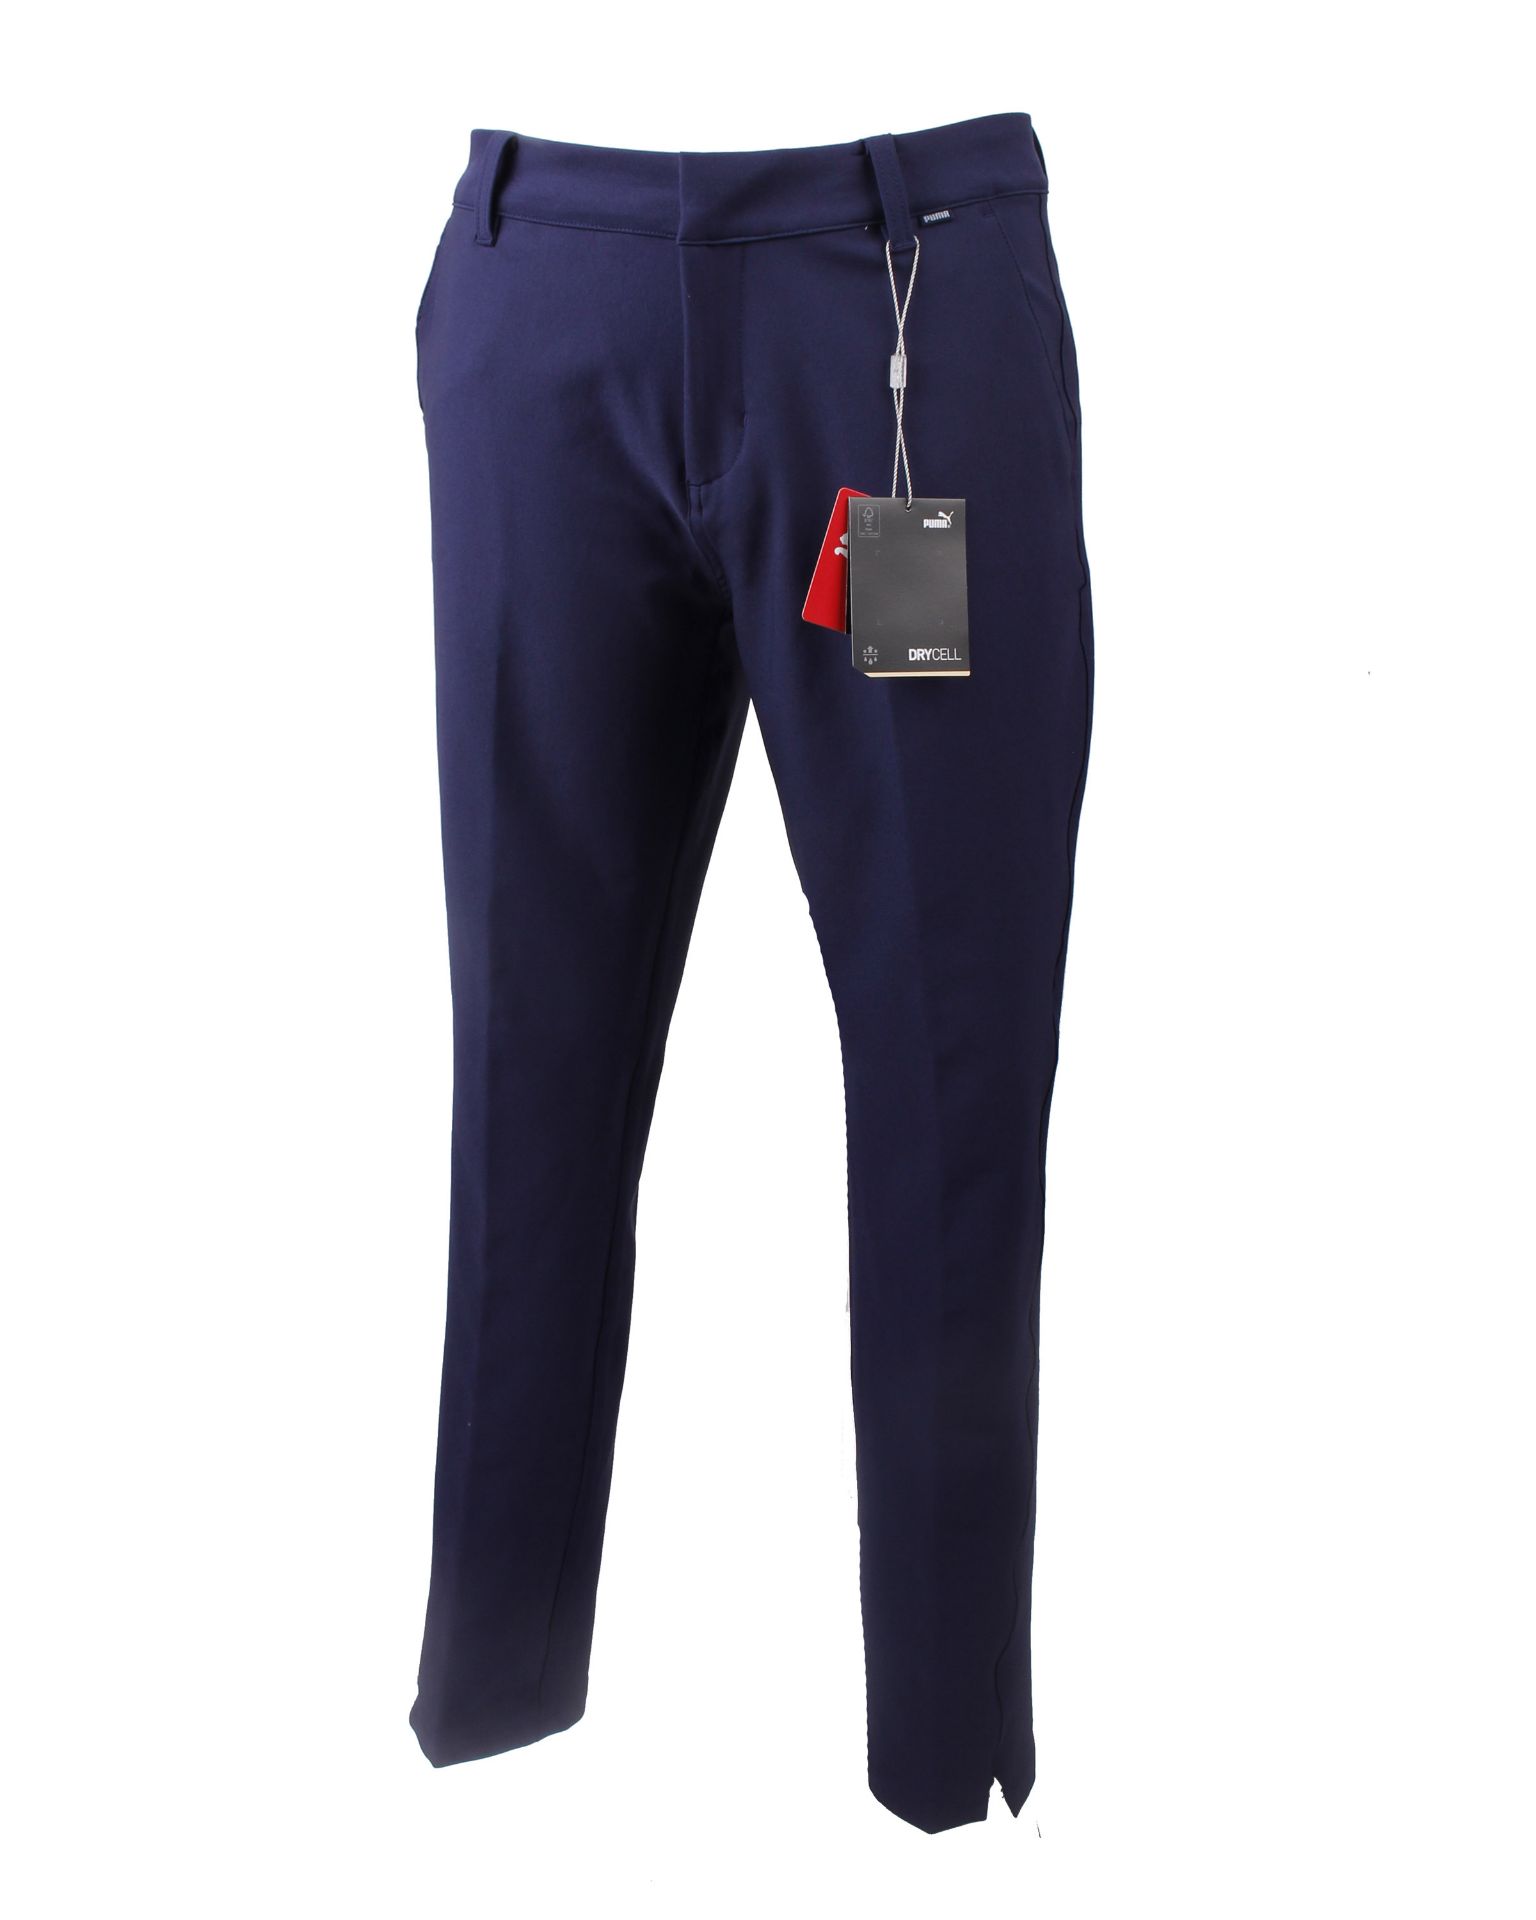 Seven pairs of men's as new Puma DryCell golf trousers in peacoat (Three EU L, two EU XL and two - Image 3 of 3